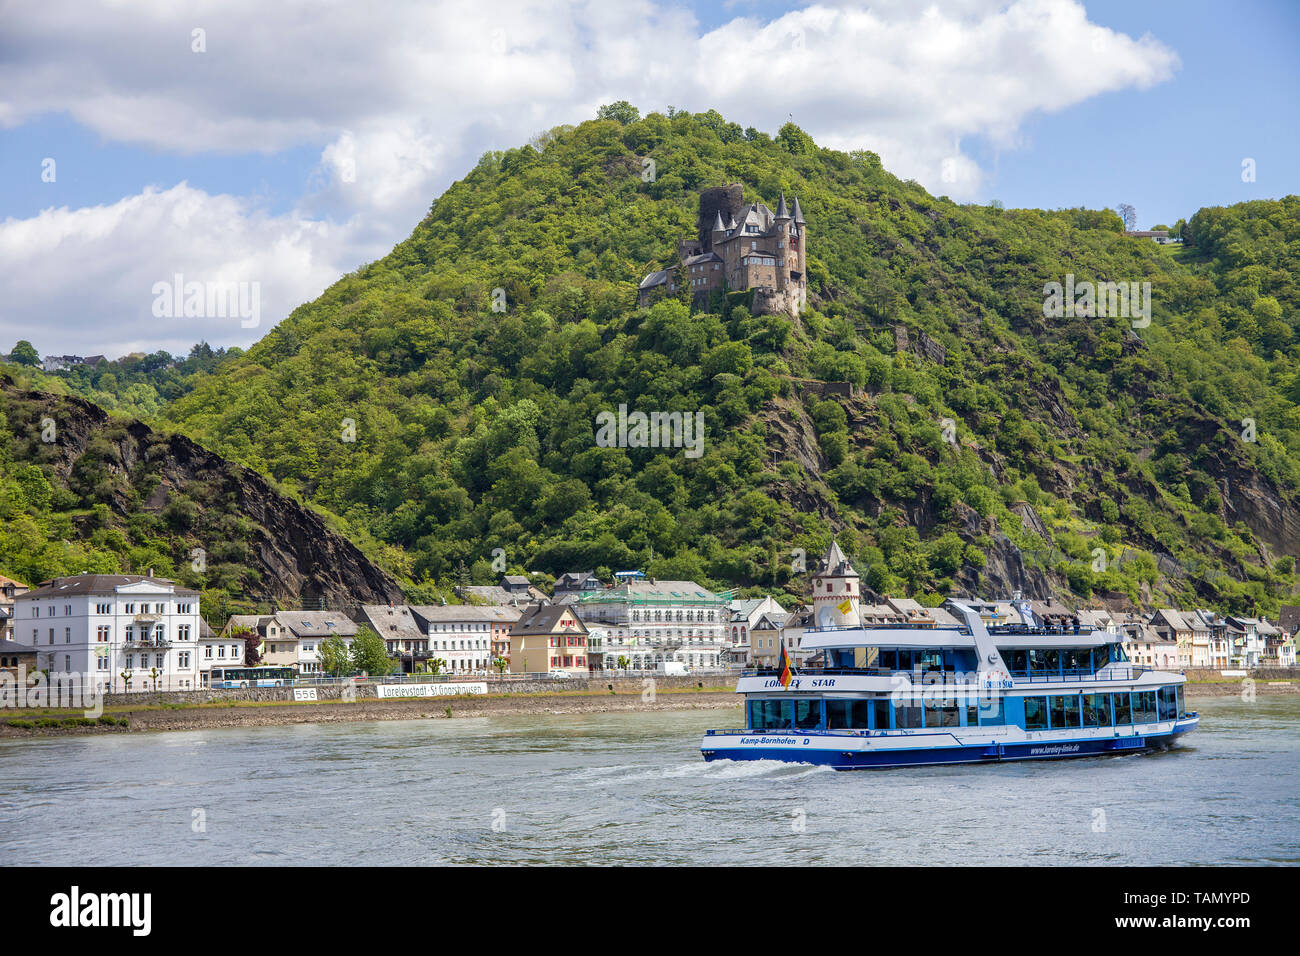 Excursion ship at St. Goarshausen, above the Katz castle, Unesco world heritage site, Upper Middle Rhine Valley, Rhineland-Palatinate, Germany Stock Photo